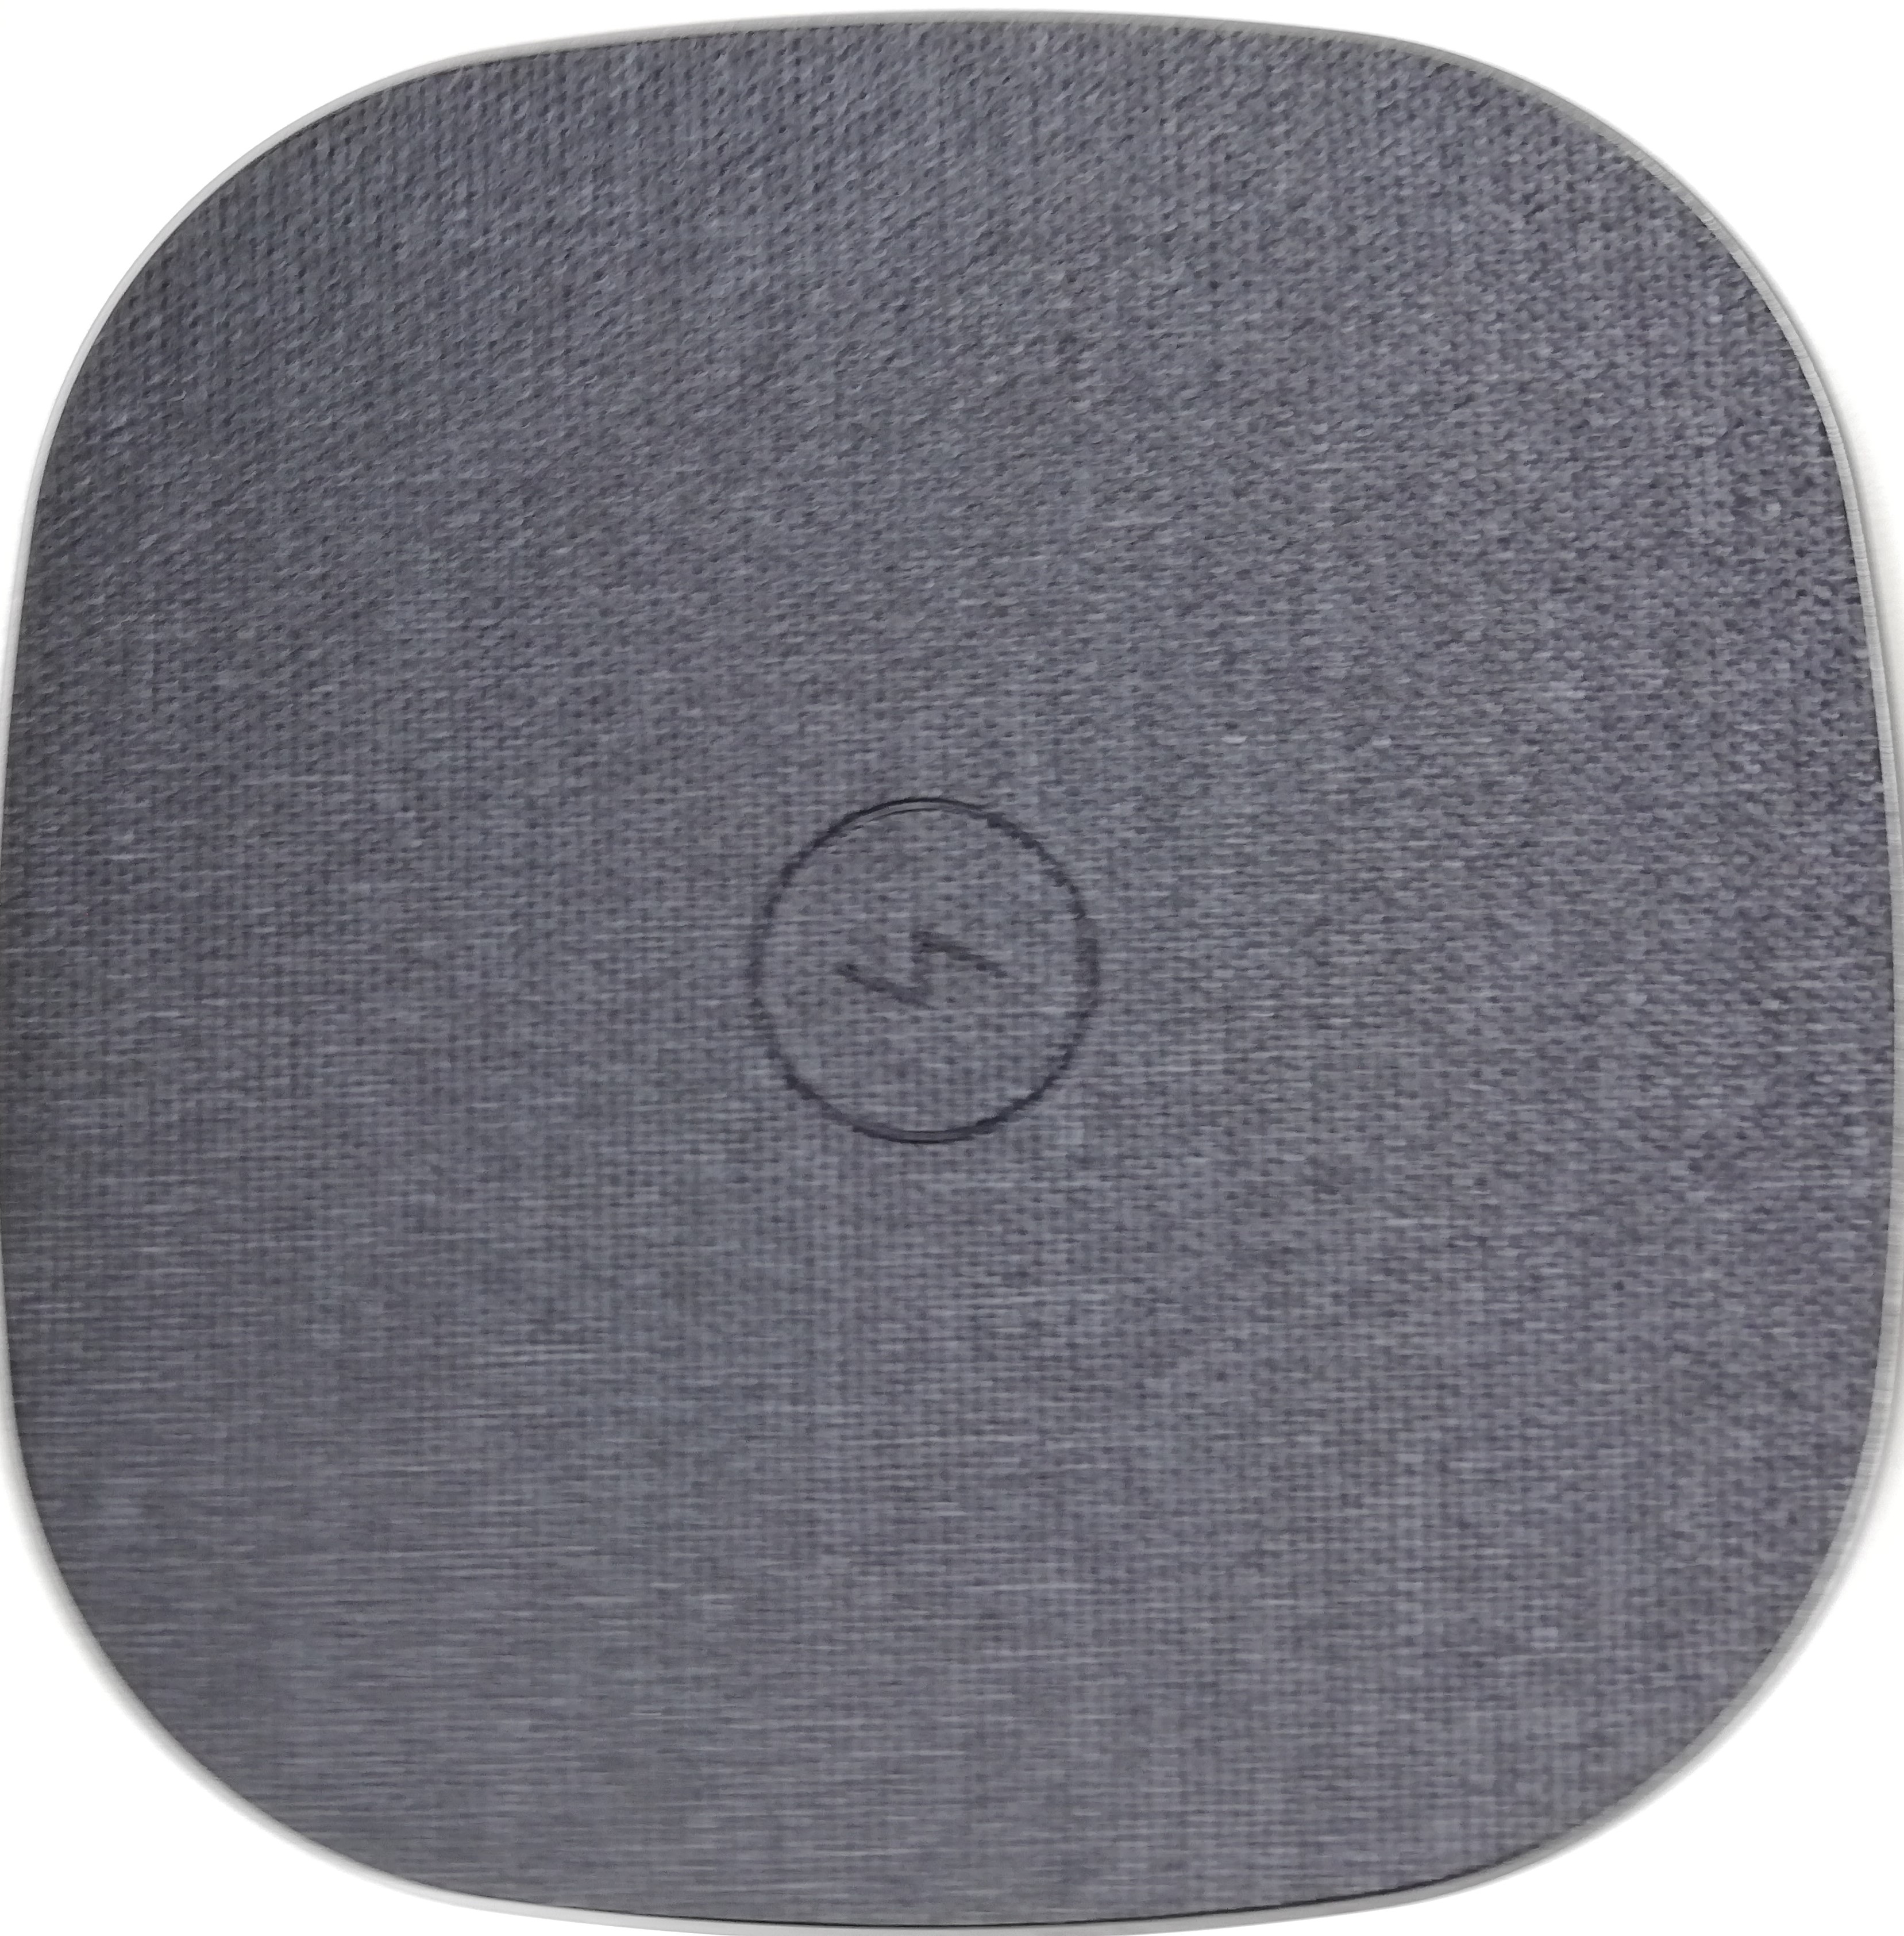 Sehr guter Wireless Charger!